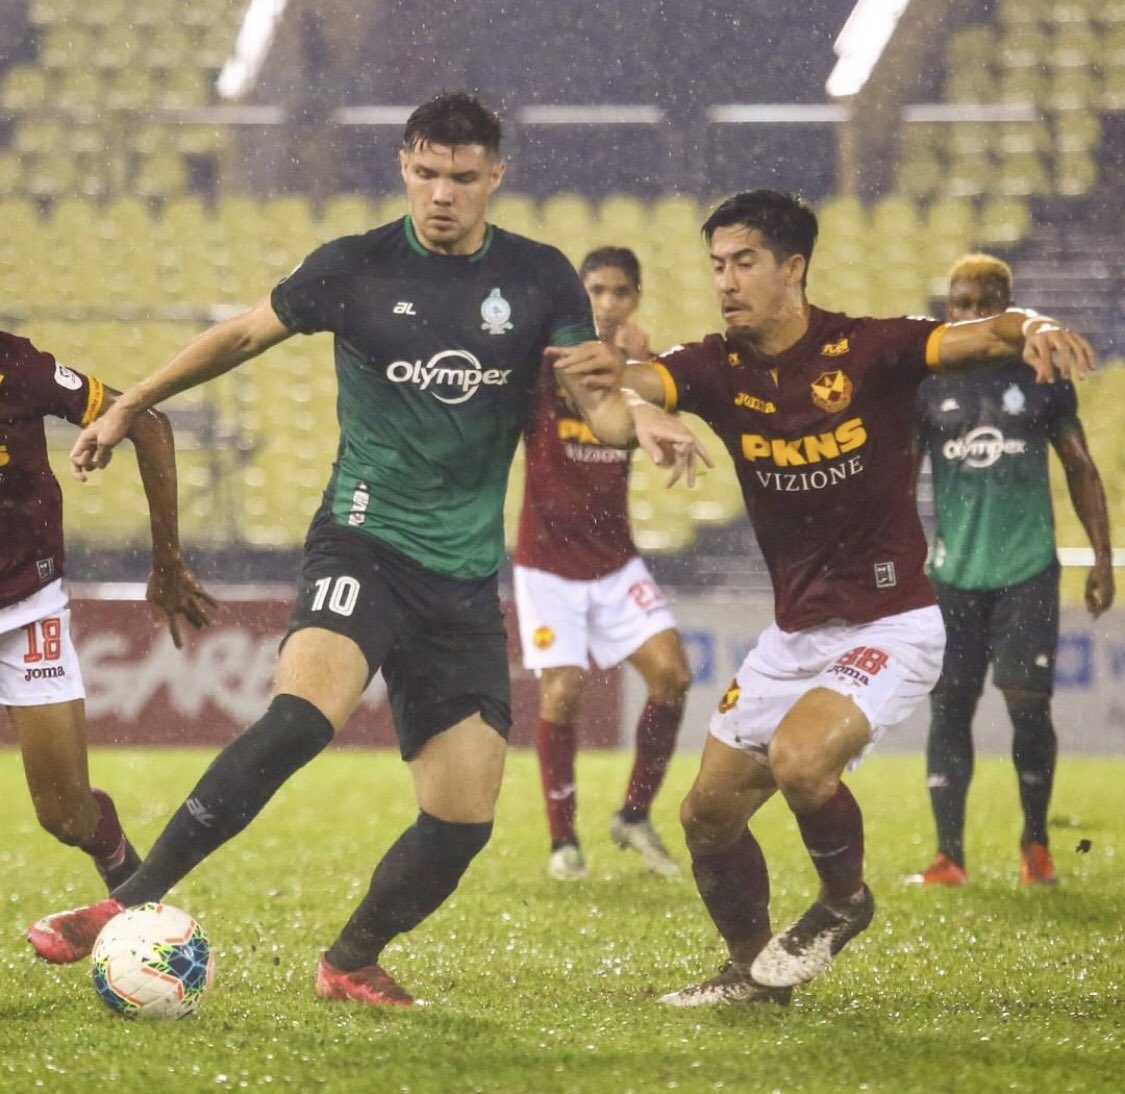 Good win in tough conditions!!! 

Through to the next round ❤️💛

🏆

#ithasBGAN #MalaysiaCup